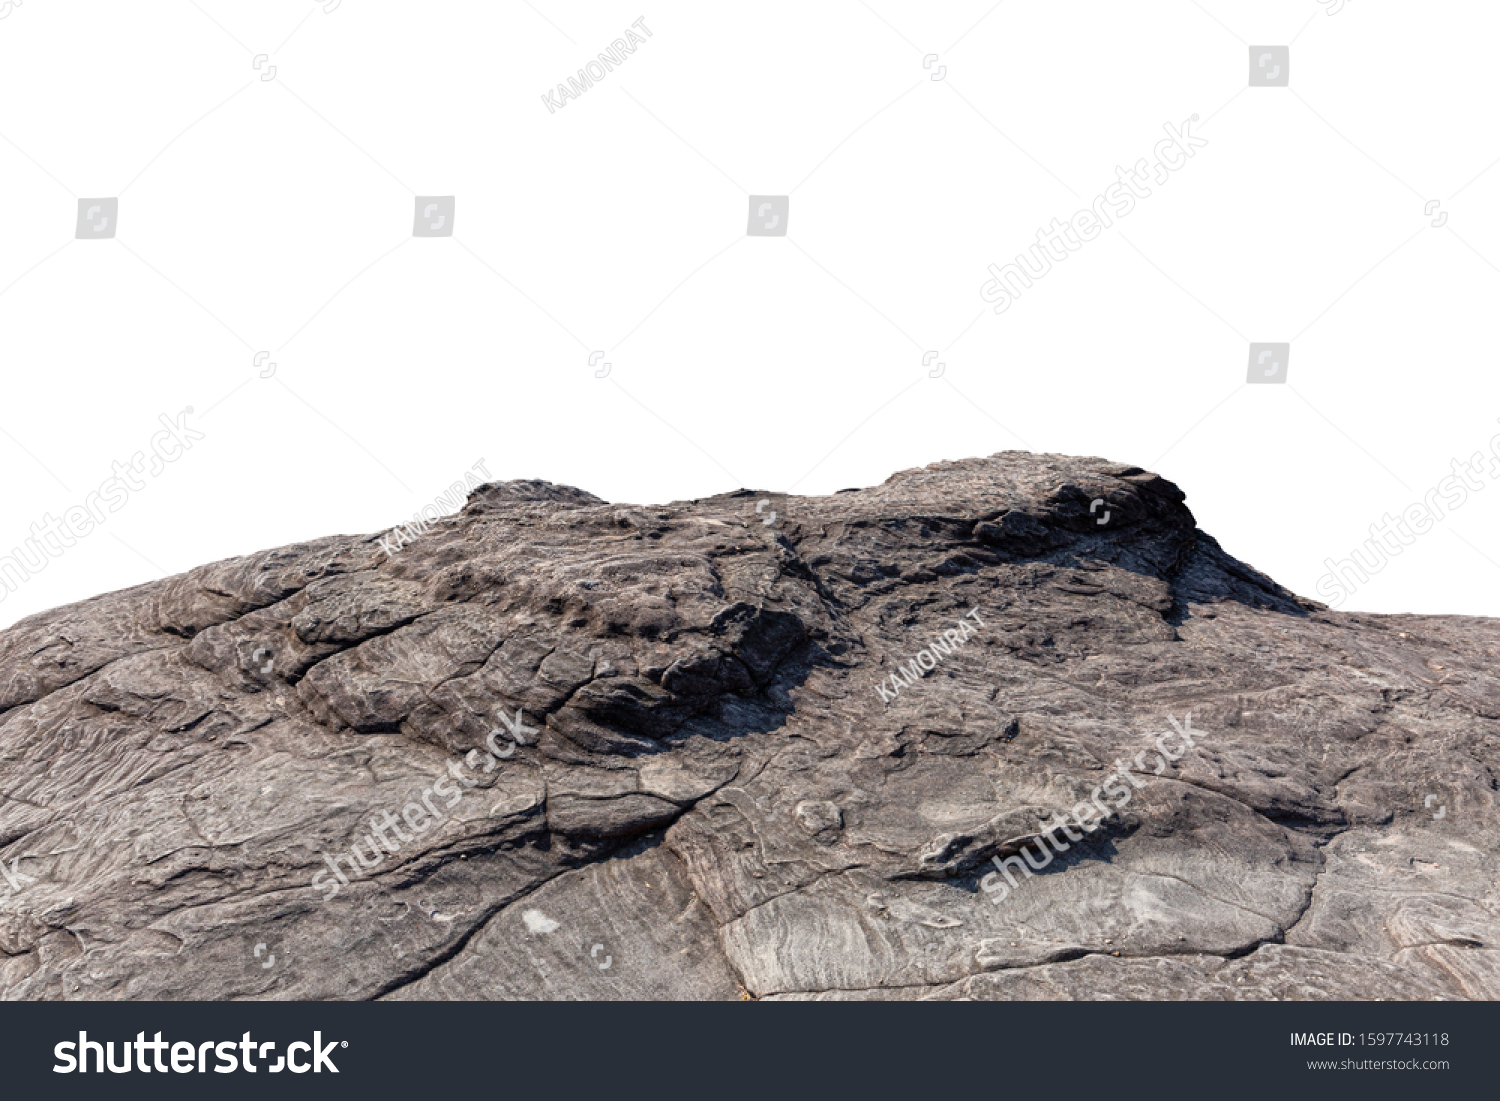 Cliff stone located part of the mountain rock isolated on white background. #1597743118